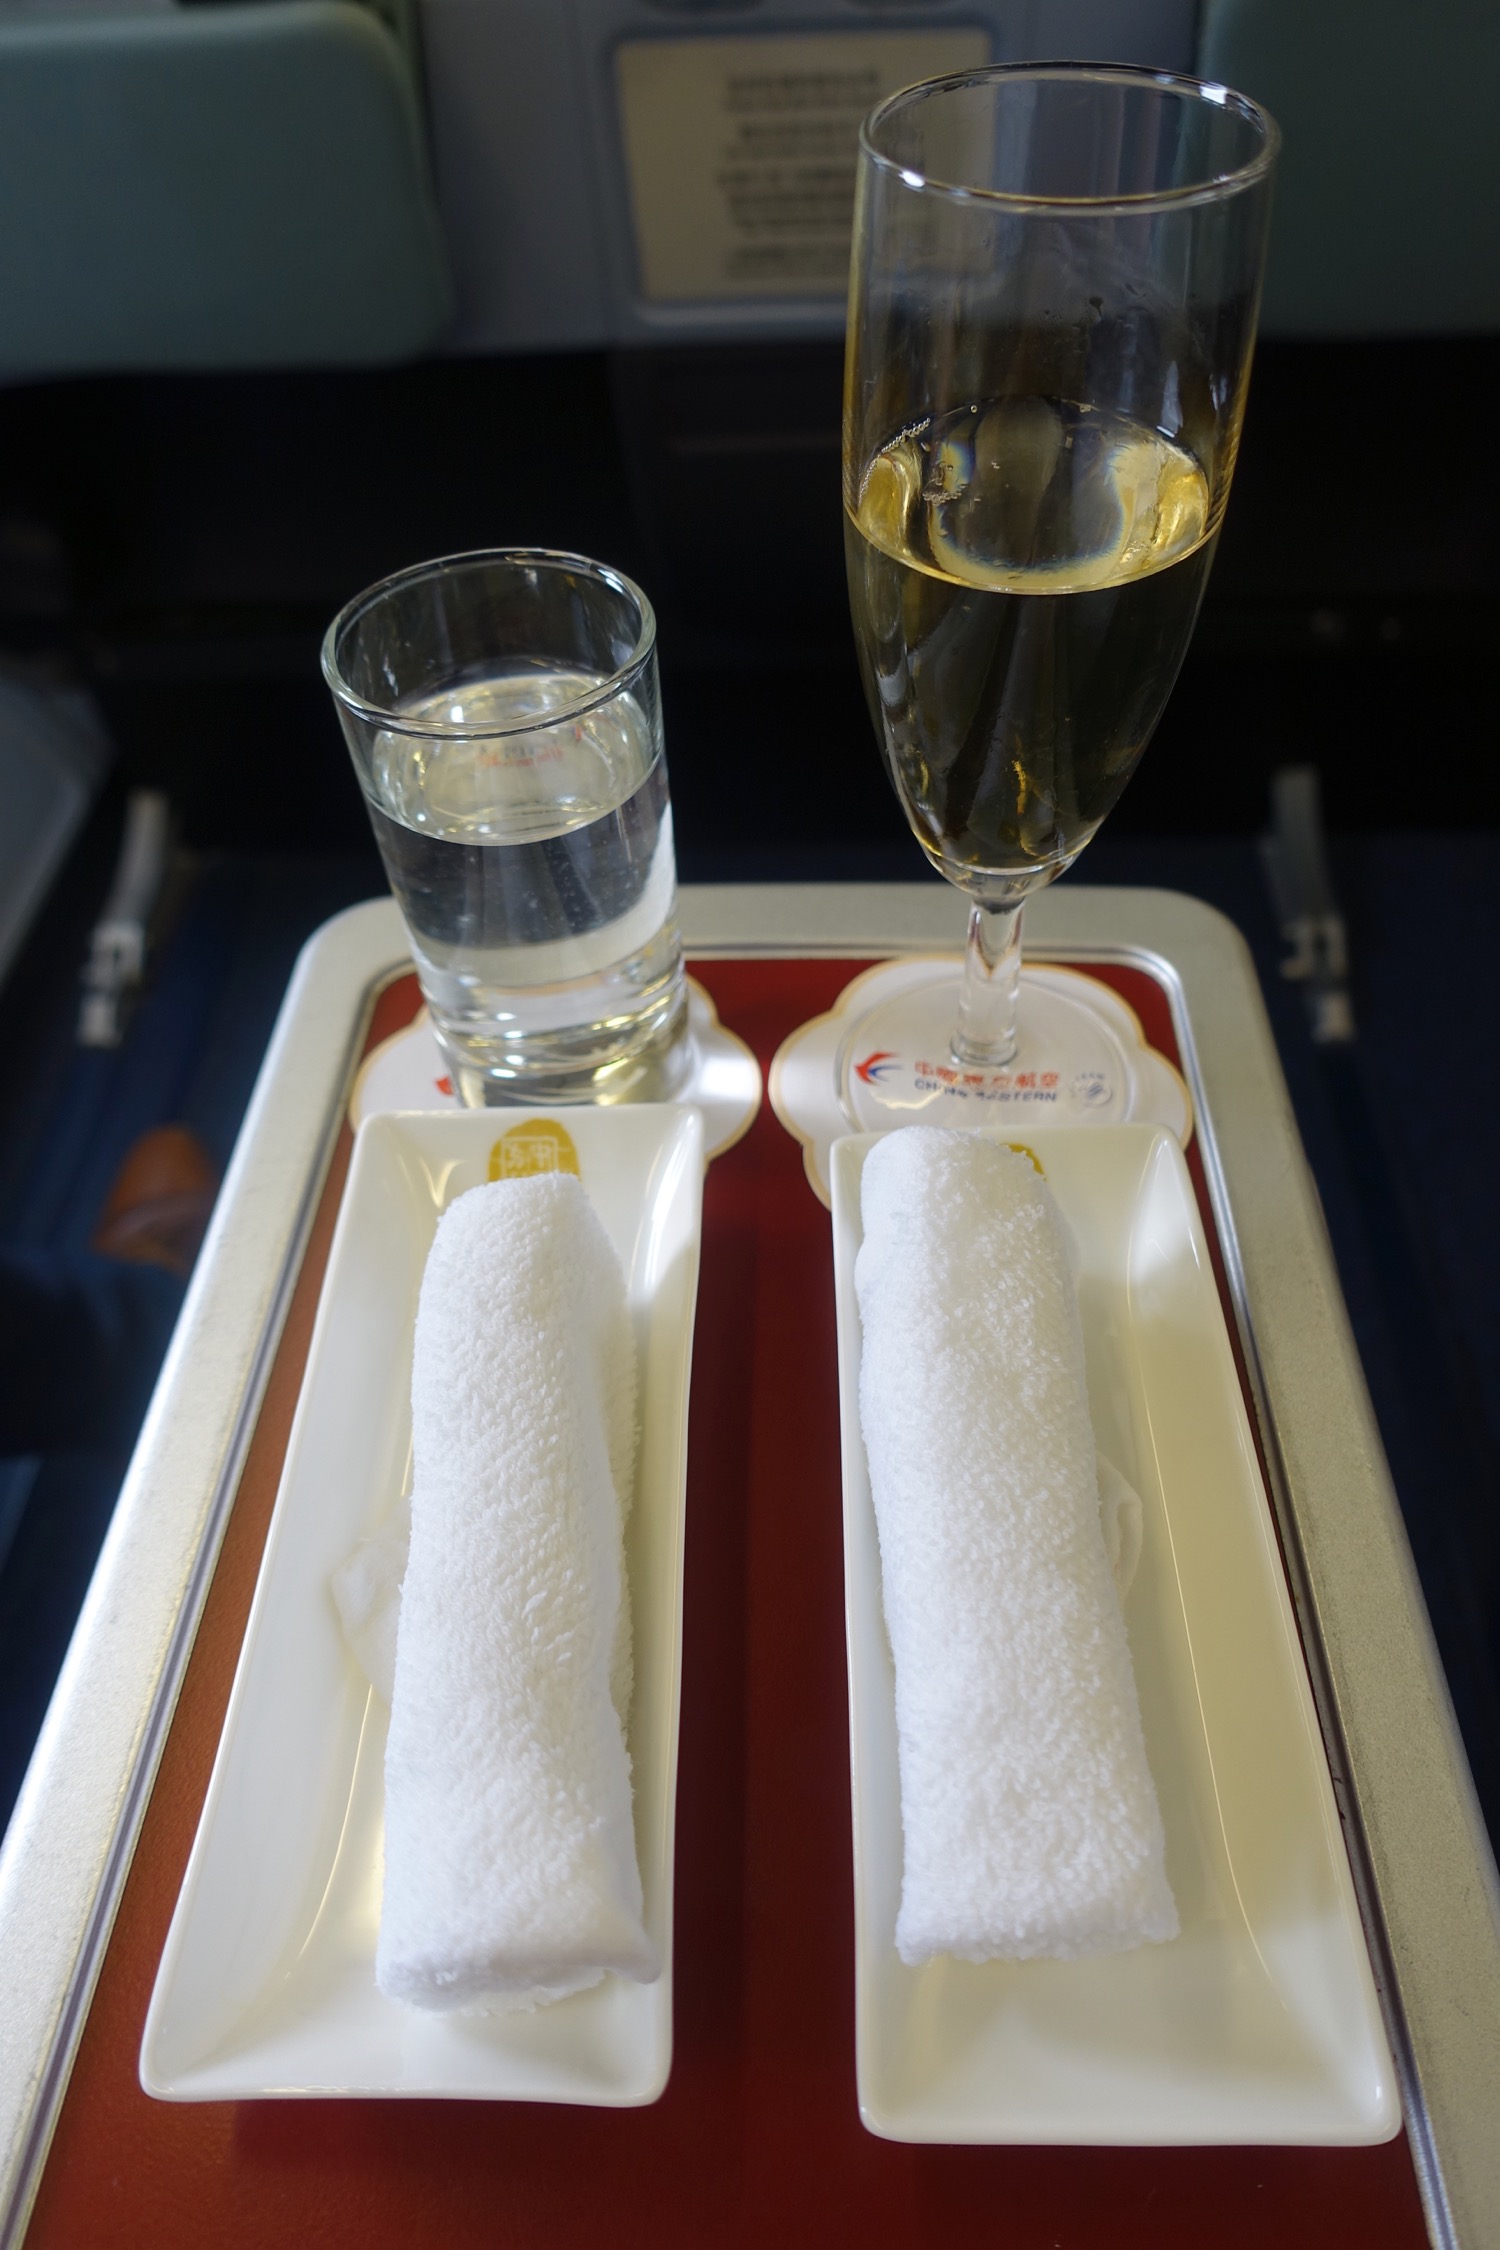 a glass of champagne and two plates of food on a tray